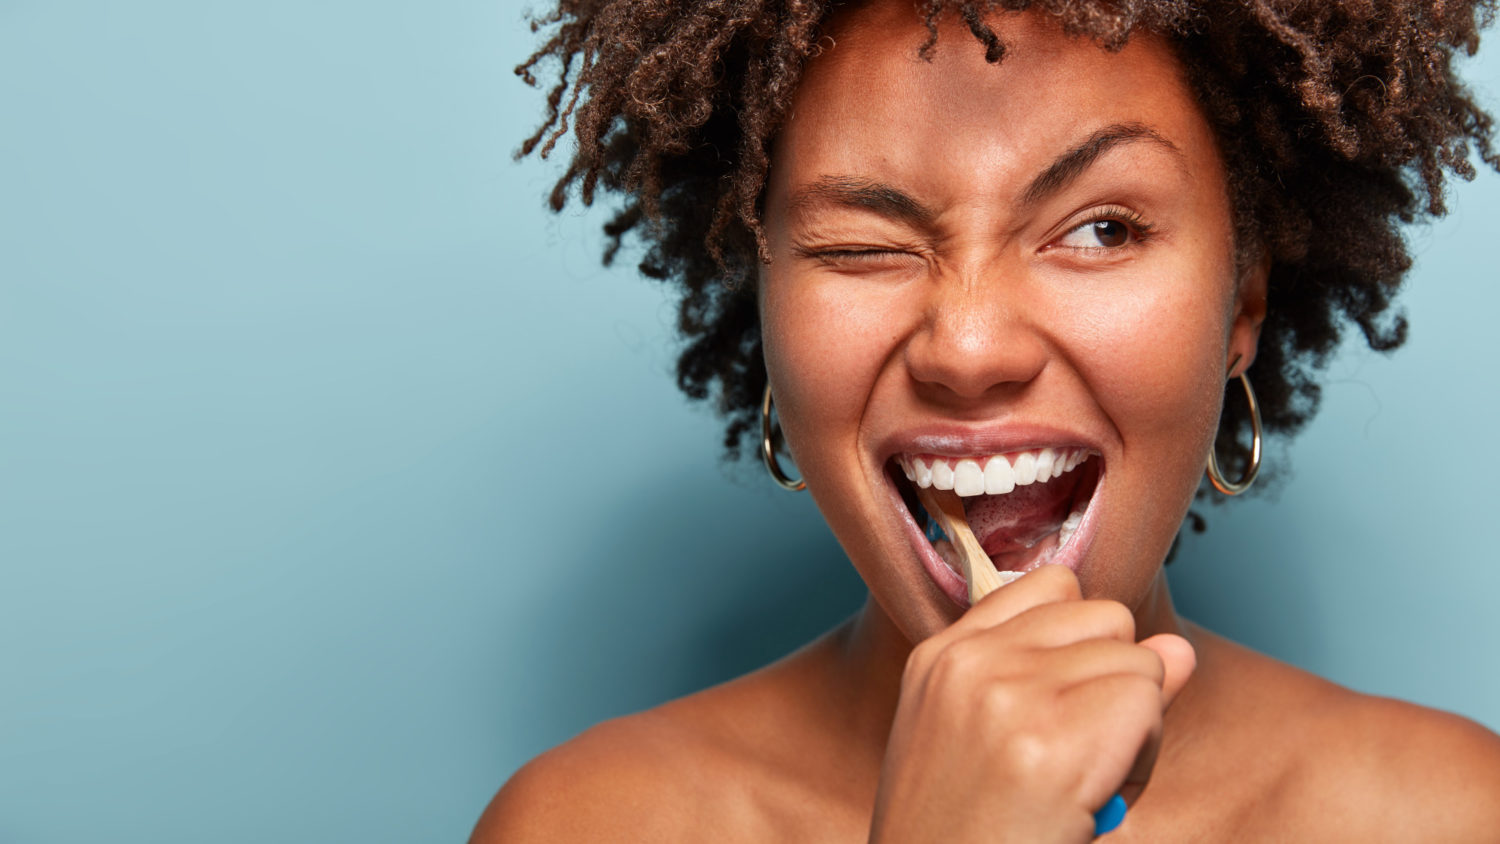 How To Brush Your Teeth: The Proper Techniques For A Pearly Smile | Uncustomary